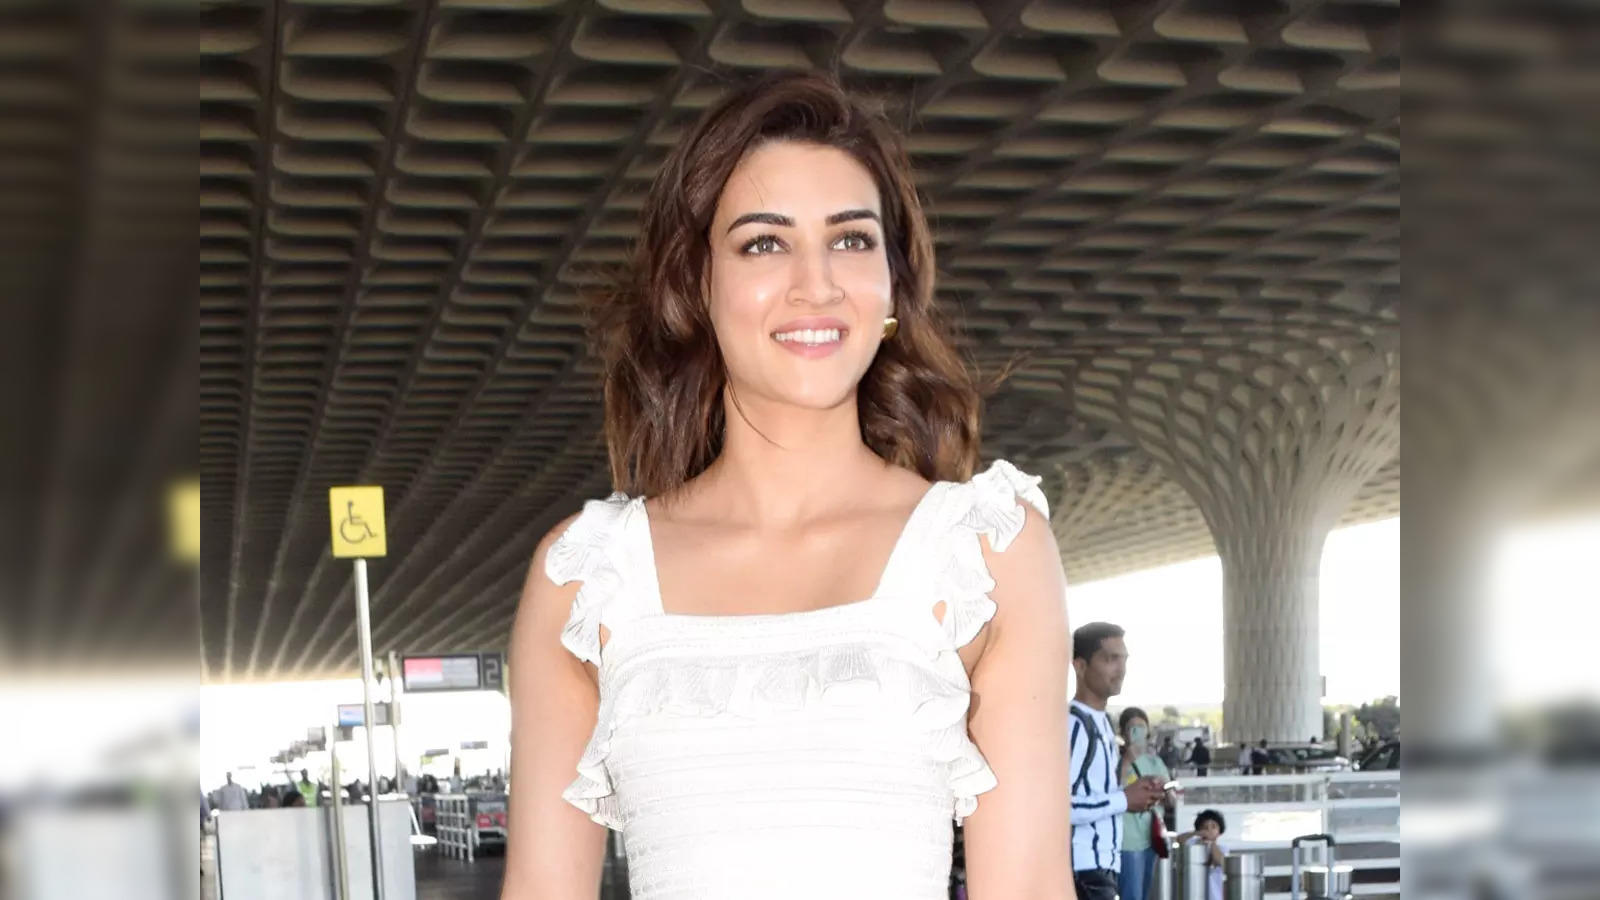 Kriti Sanonxxx - kriti sanon news: Kriti Sanon wins hearts after videos of her flying  economy go viral - The Economic Times